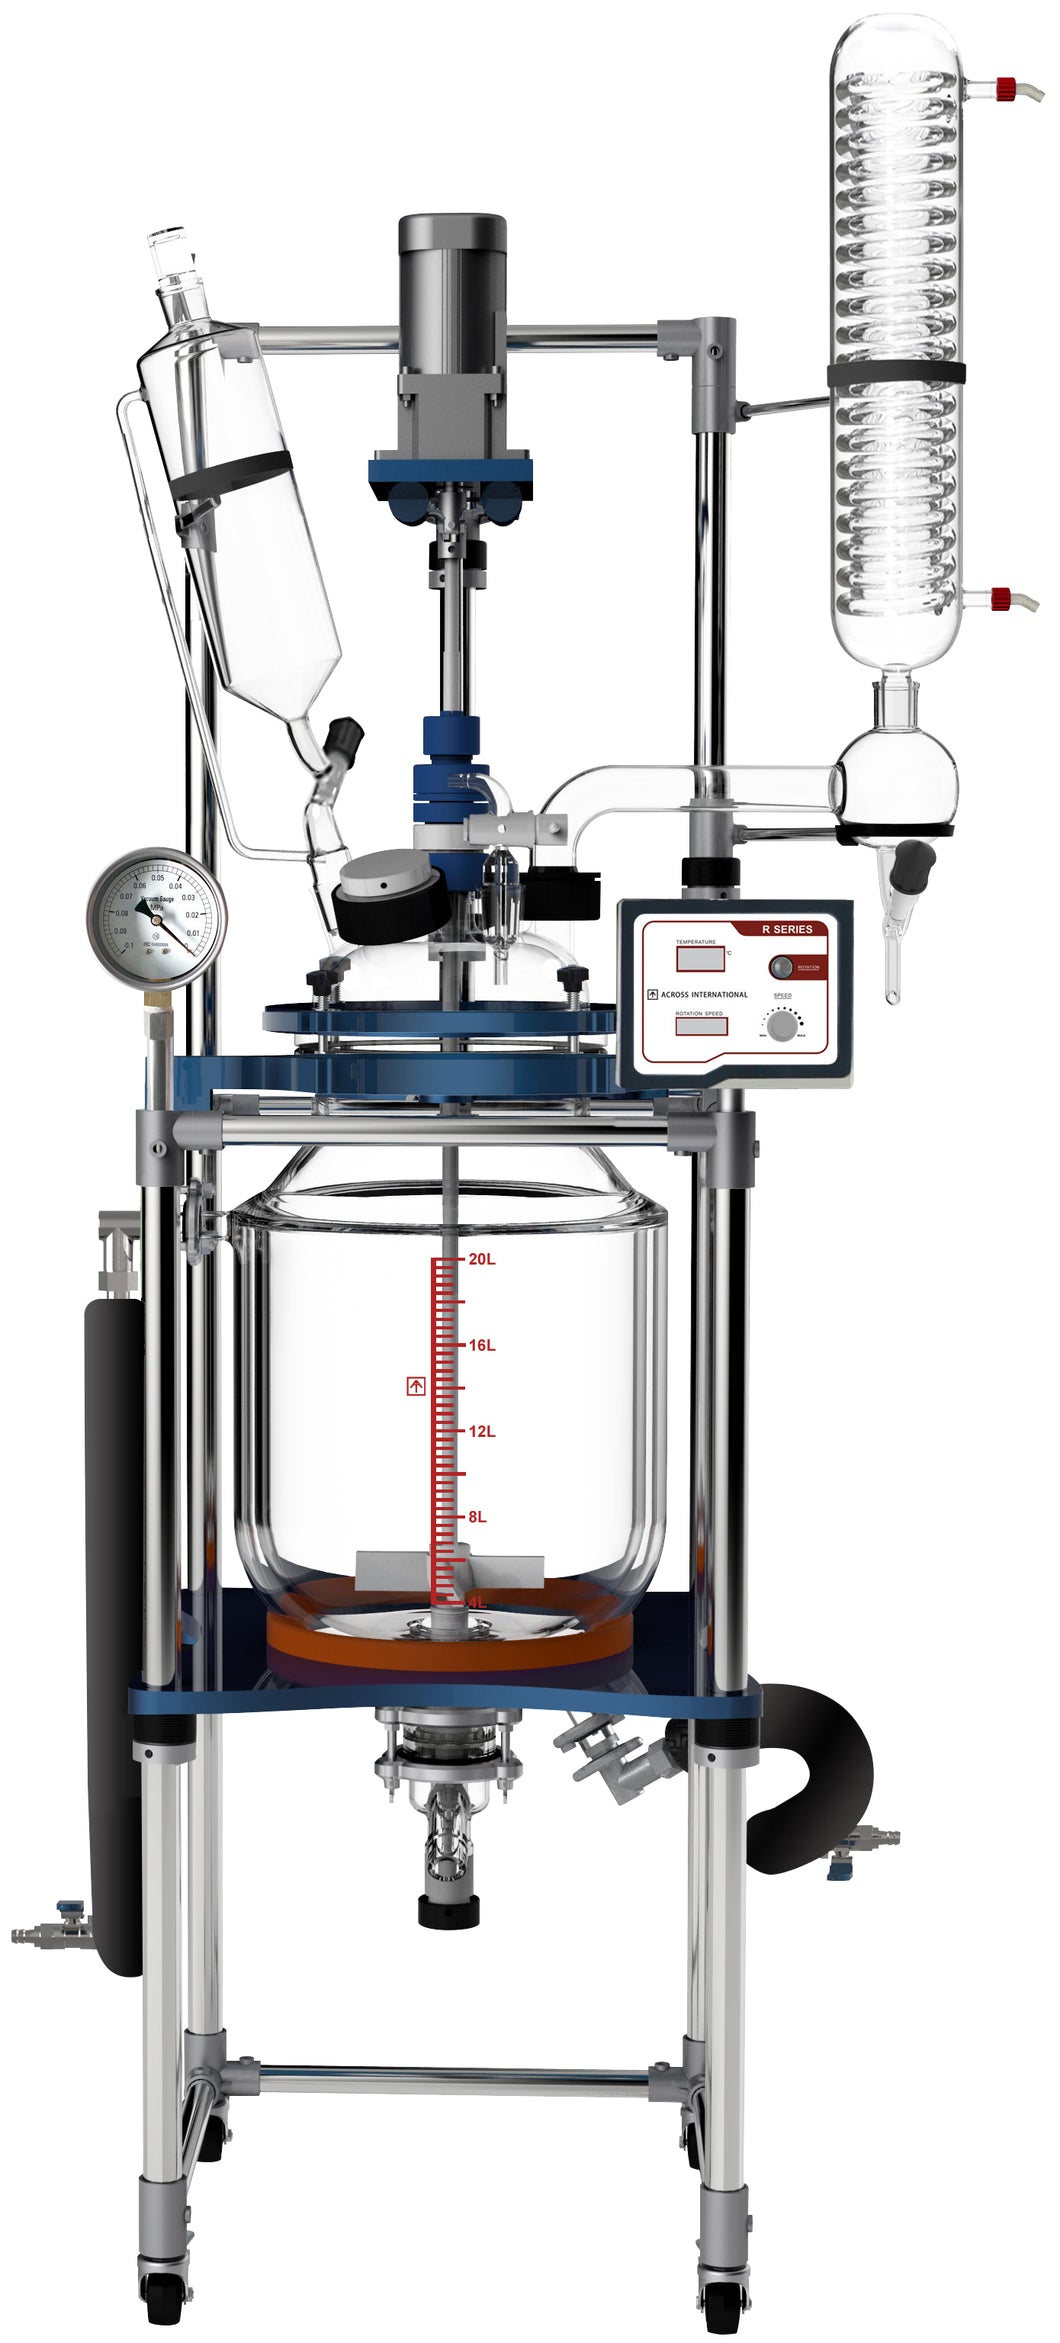 20L Single or Dual Jacketed Glass Reactor Systems